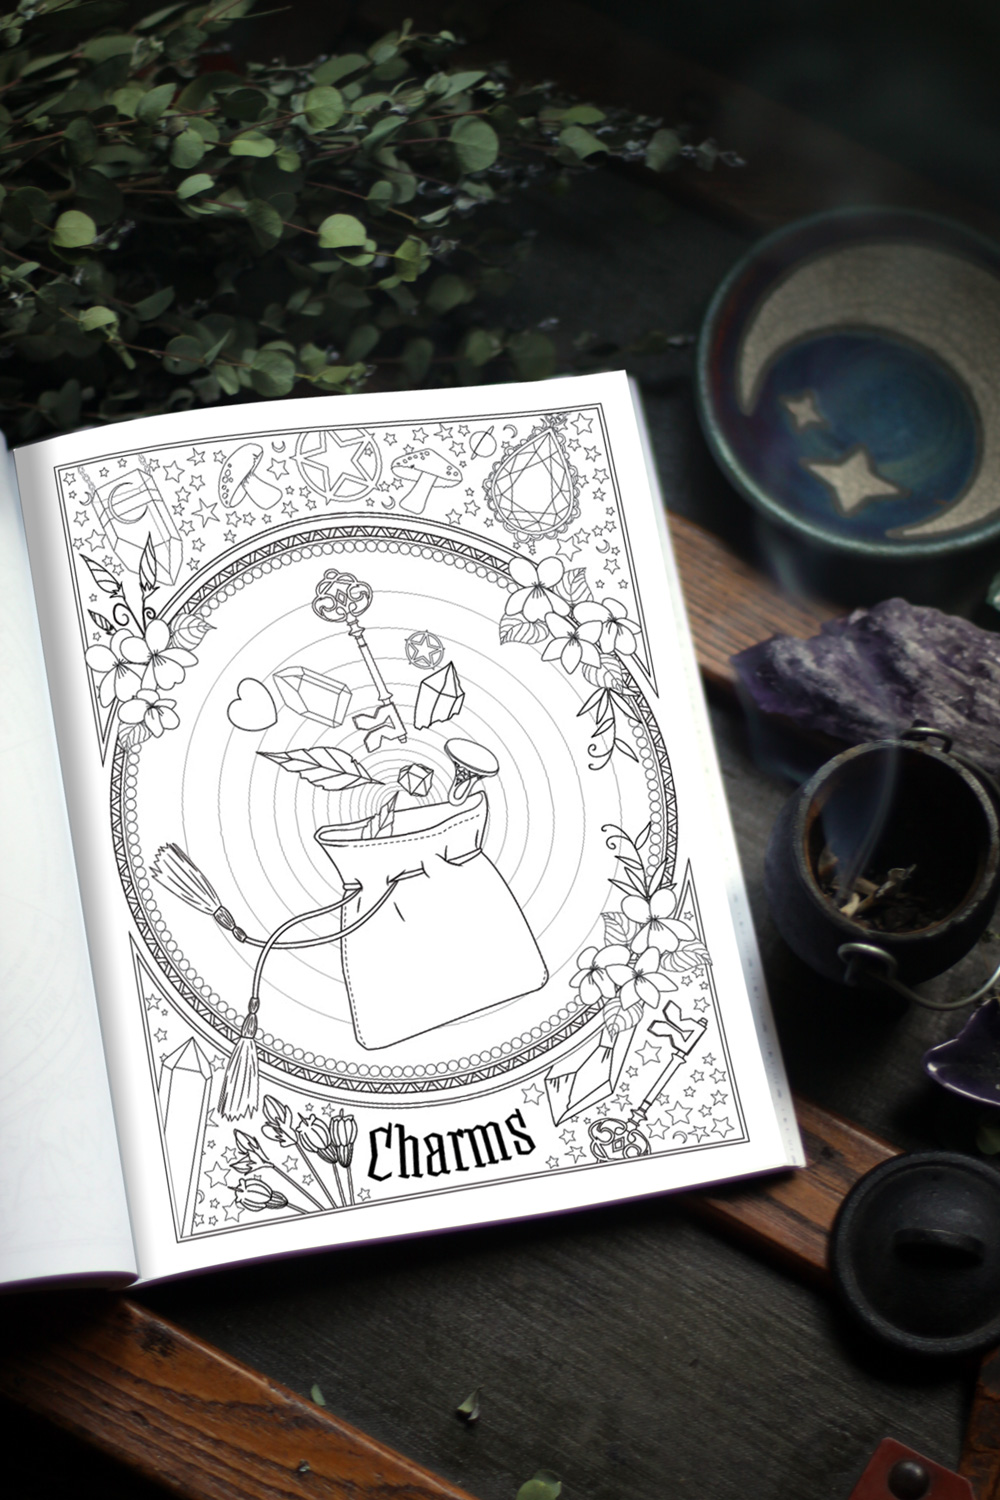 Coloring Book of Shadows: Book of Spells. Unlock your magic and cast your spells.